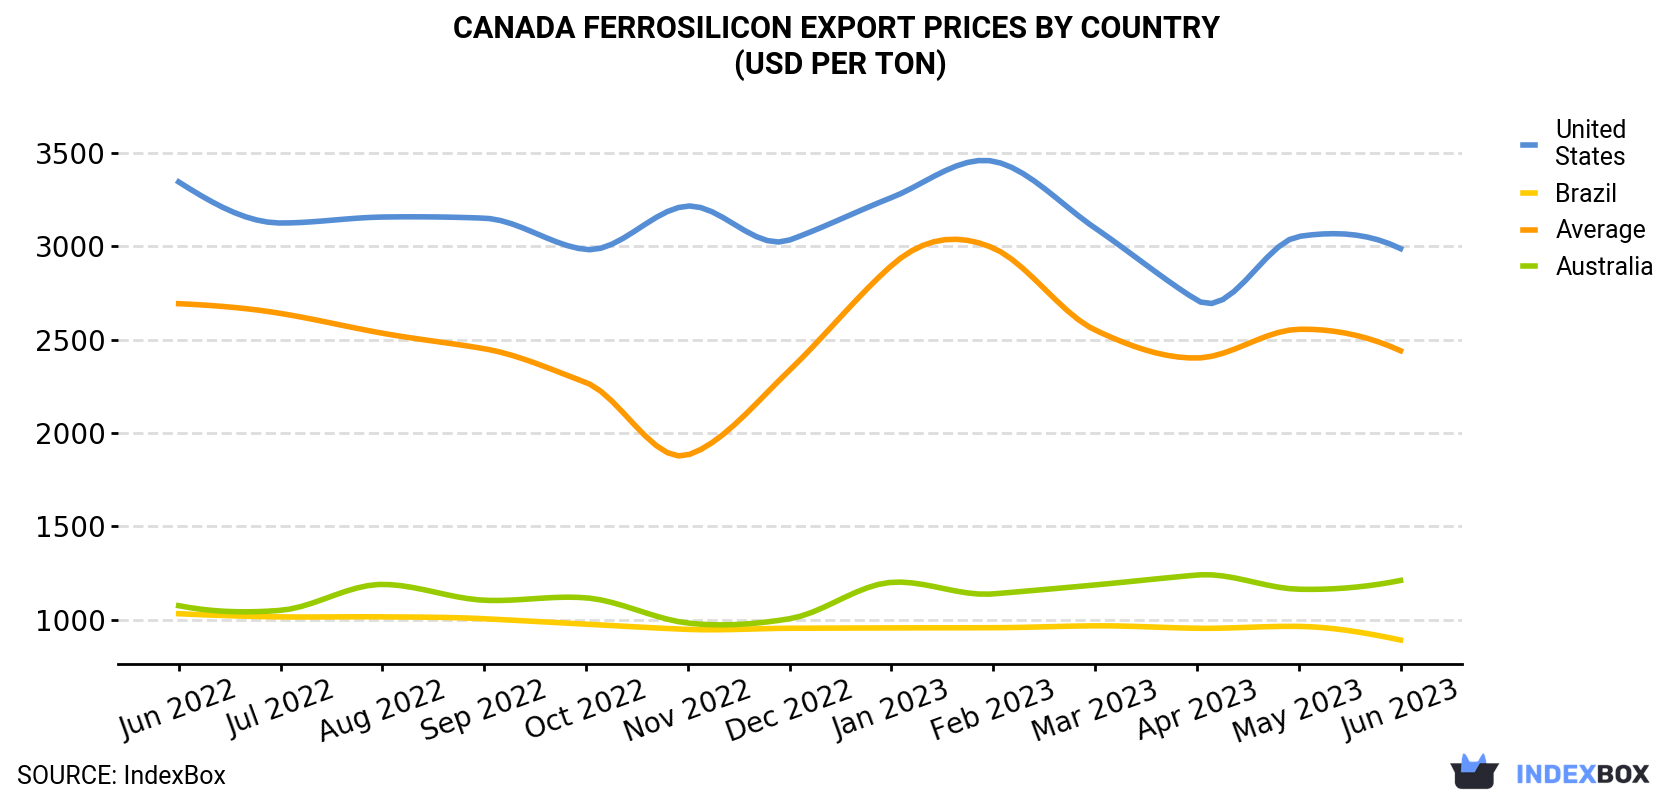 Canada Ferrosilicon Export Prices By Country (USD Per Ton)